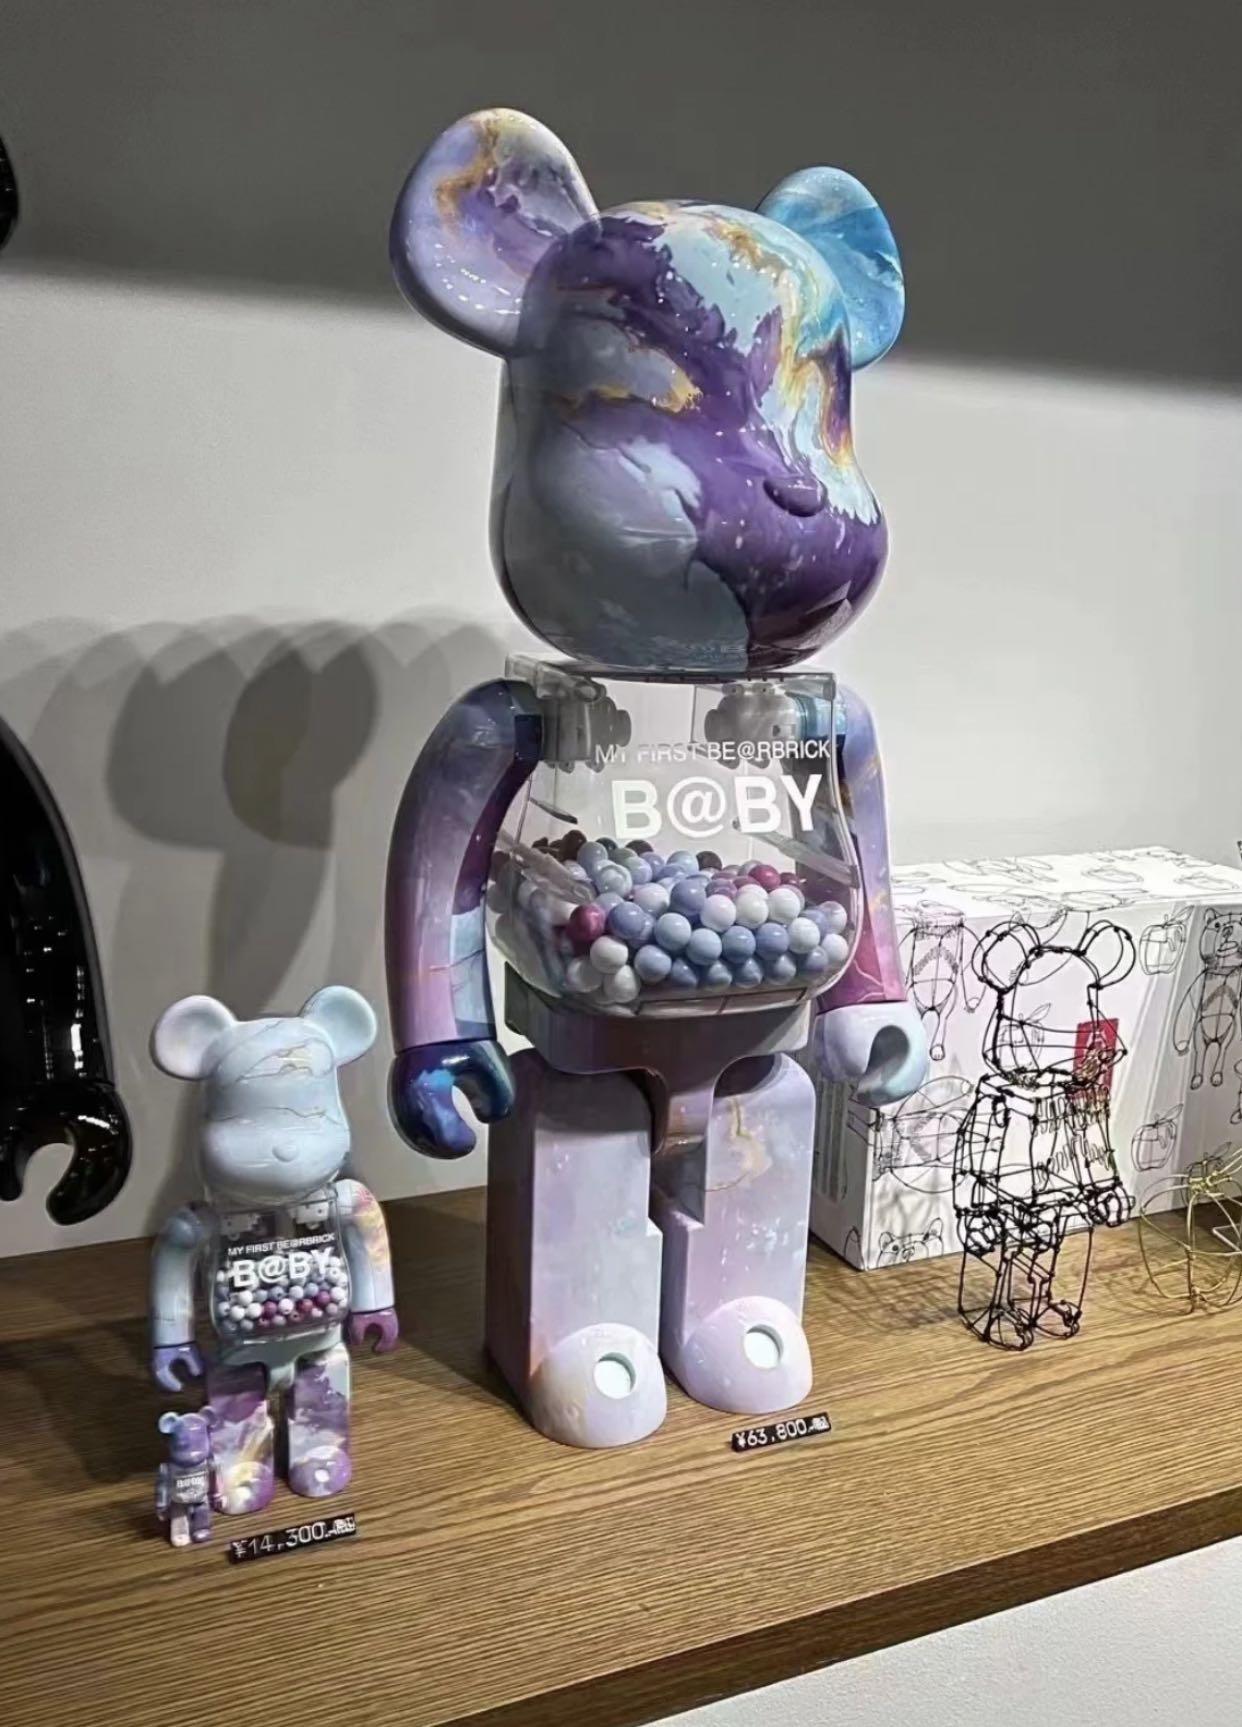 MY FIRST BE@RBRICK B@BY MARBLE 100%u0026400％ - フィギュア